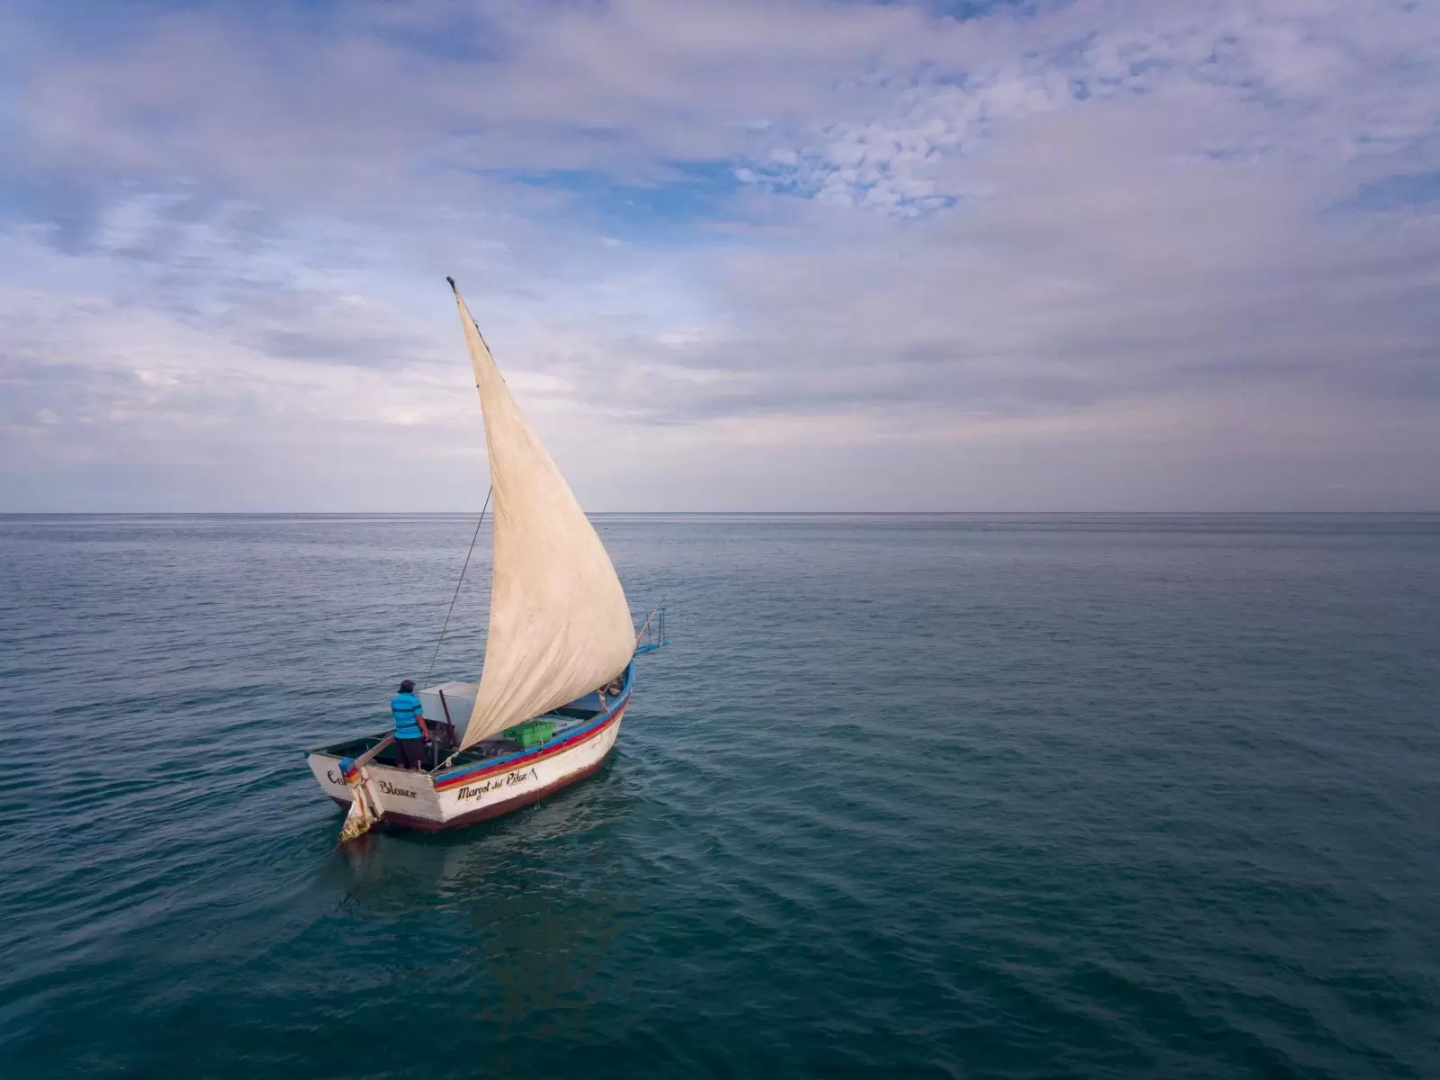 A sailboat in the middle of open ocean